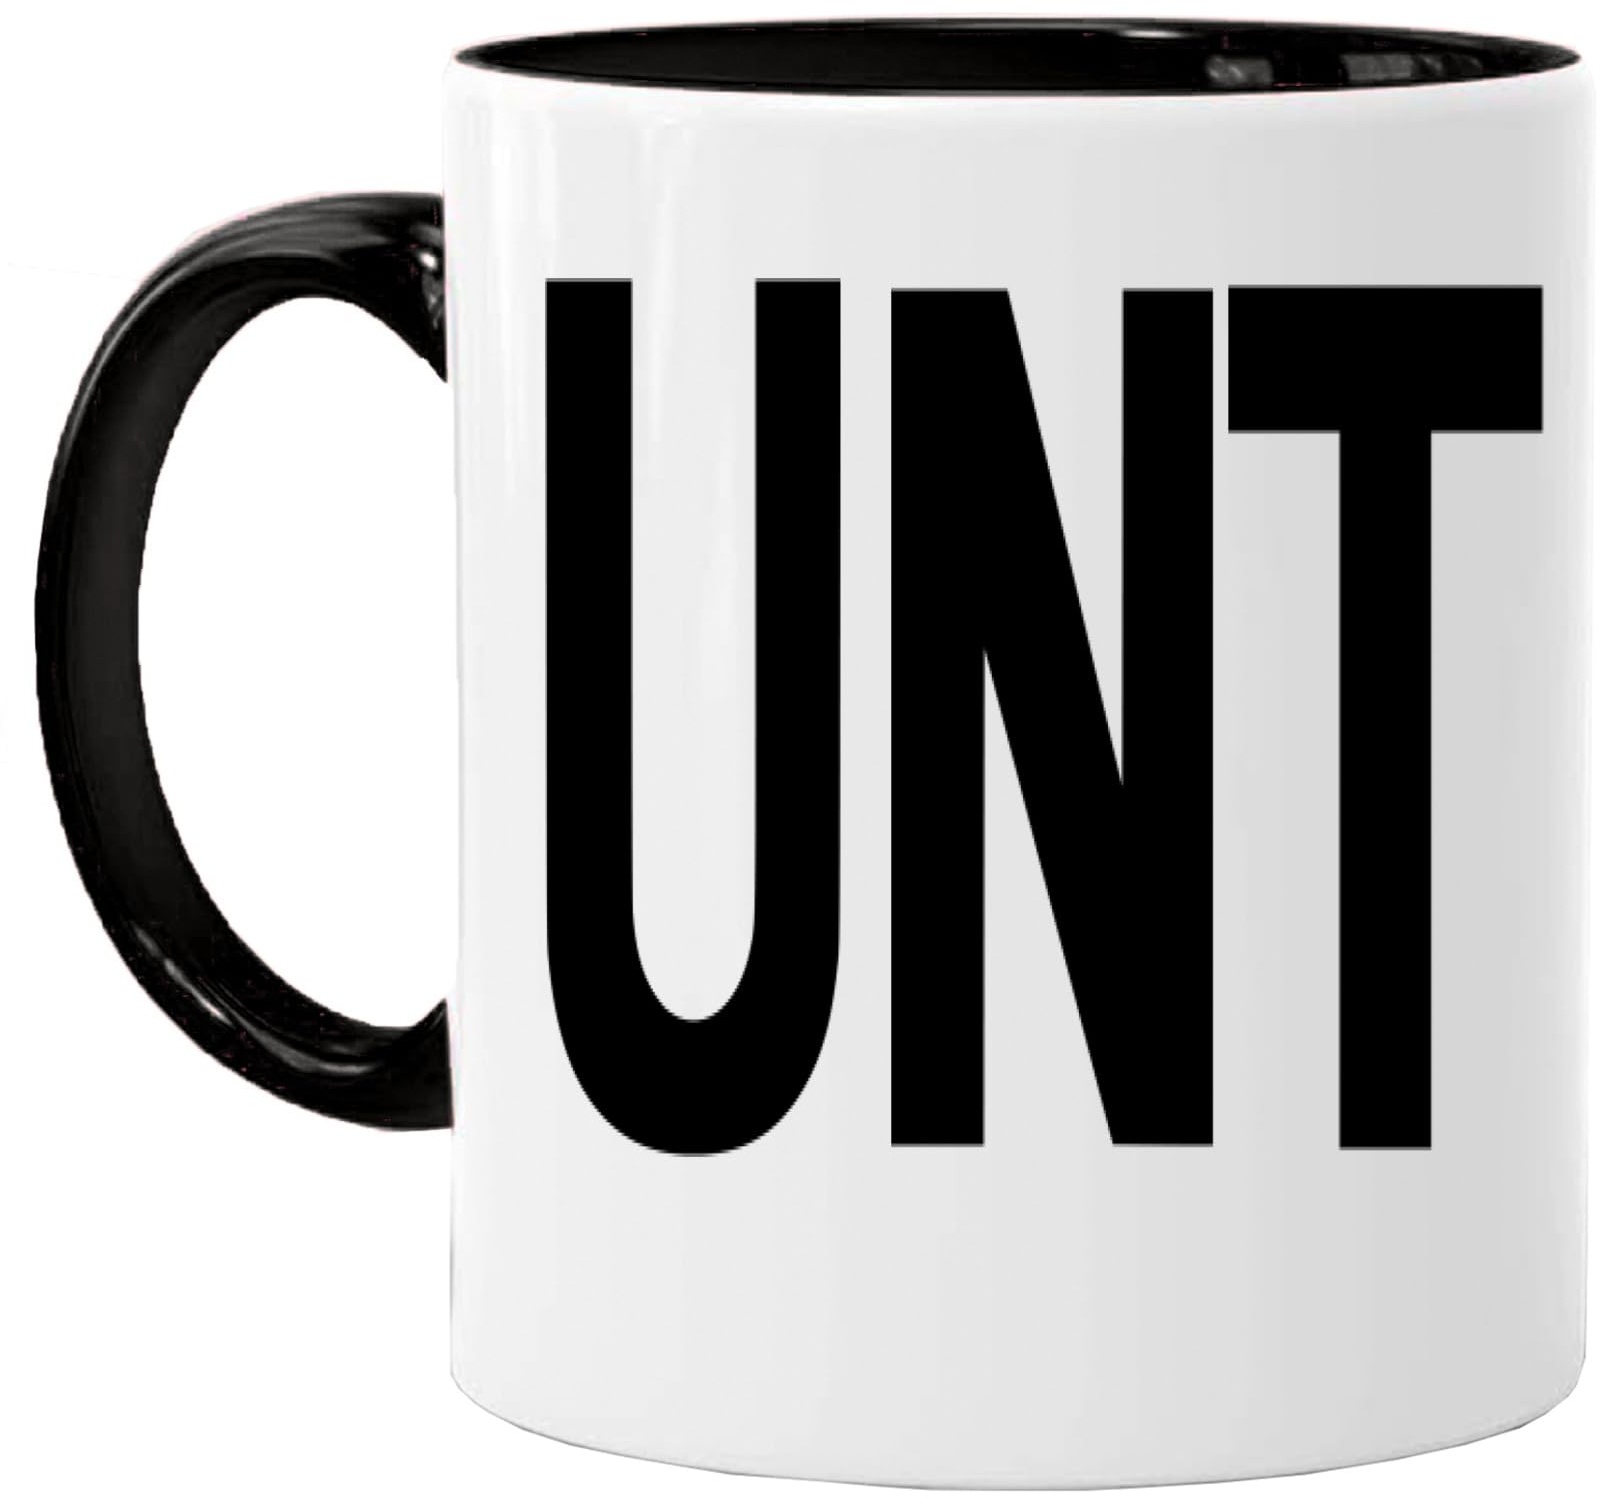 Rude mug Black Rim Handle Mug with Slogan I'M A on the other side by Personalised Printing